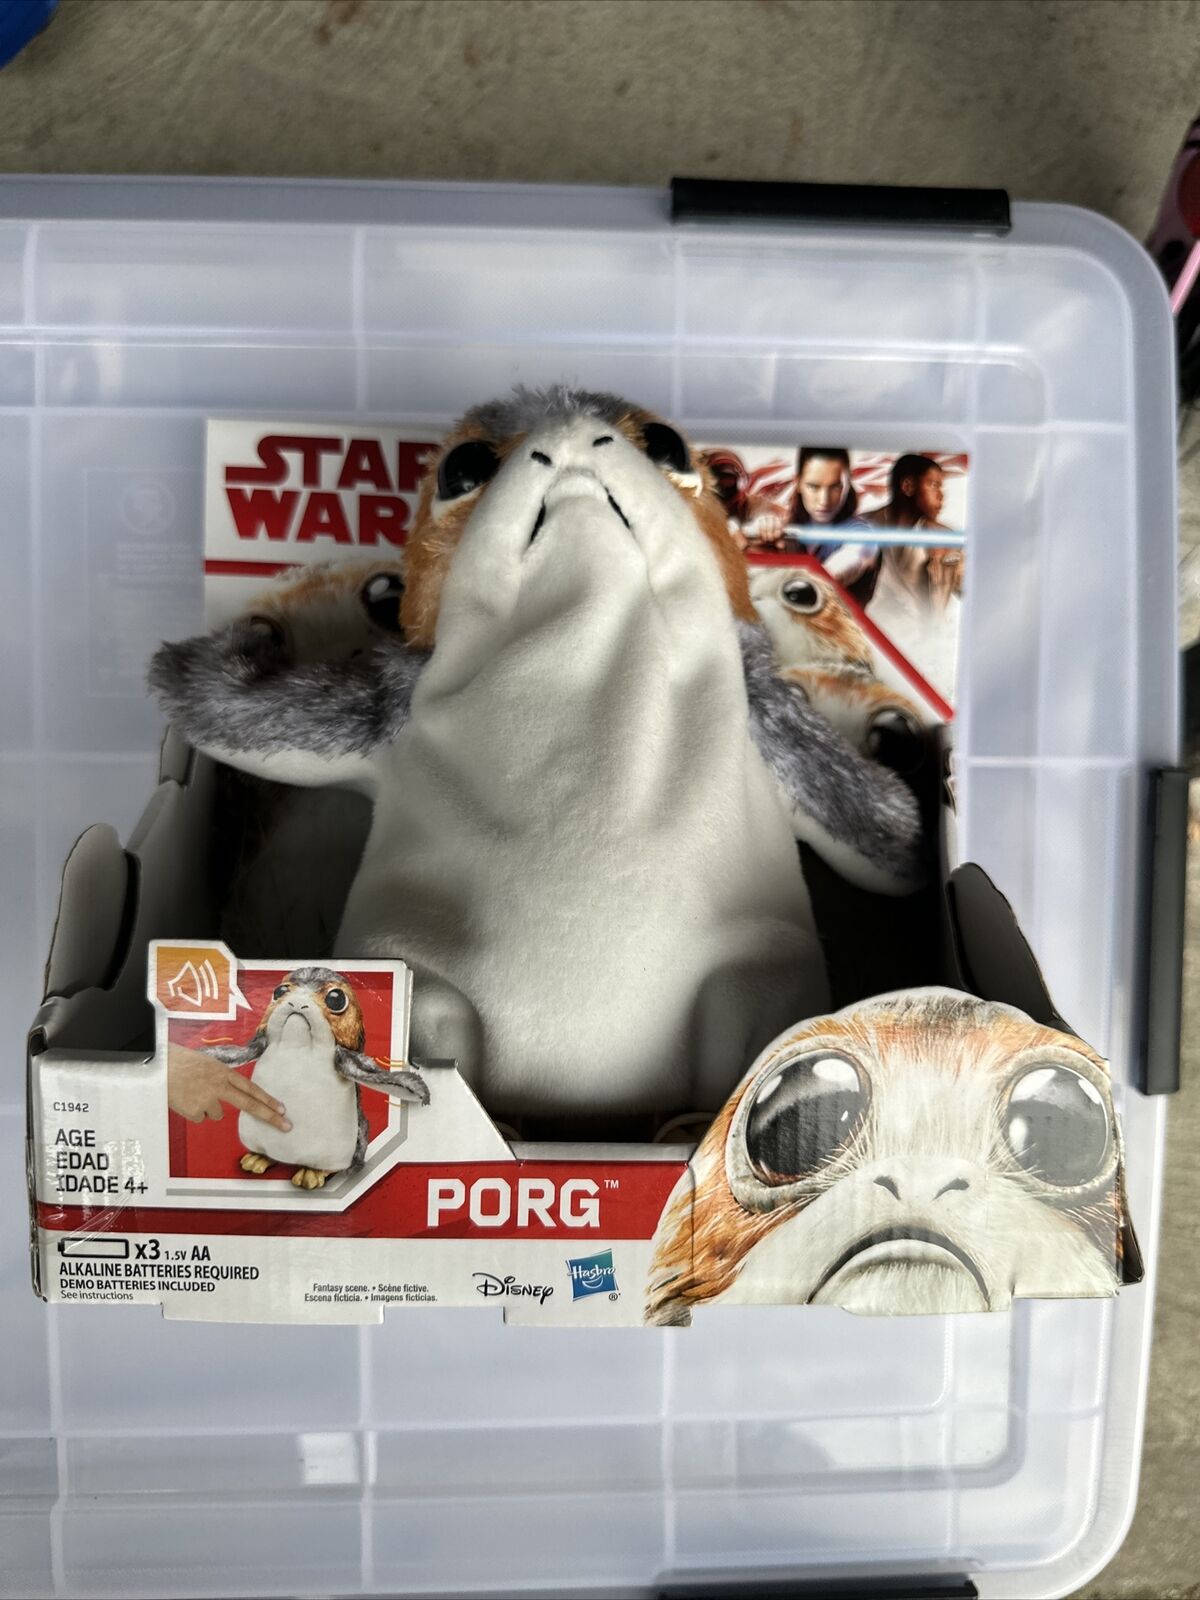 Star Wars The Last Jedi PORG Electronic Plush Toy Figure New In Box